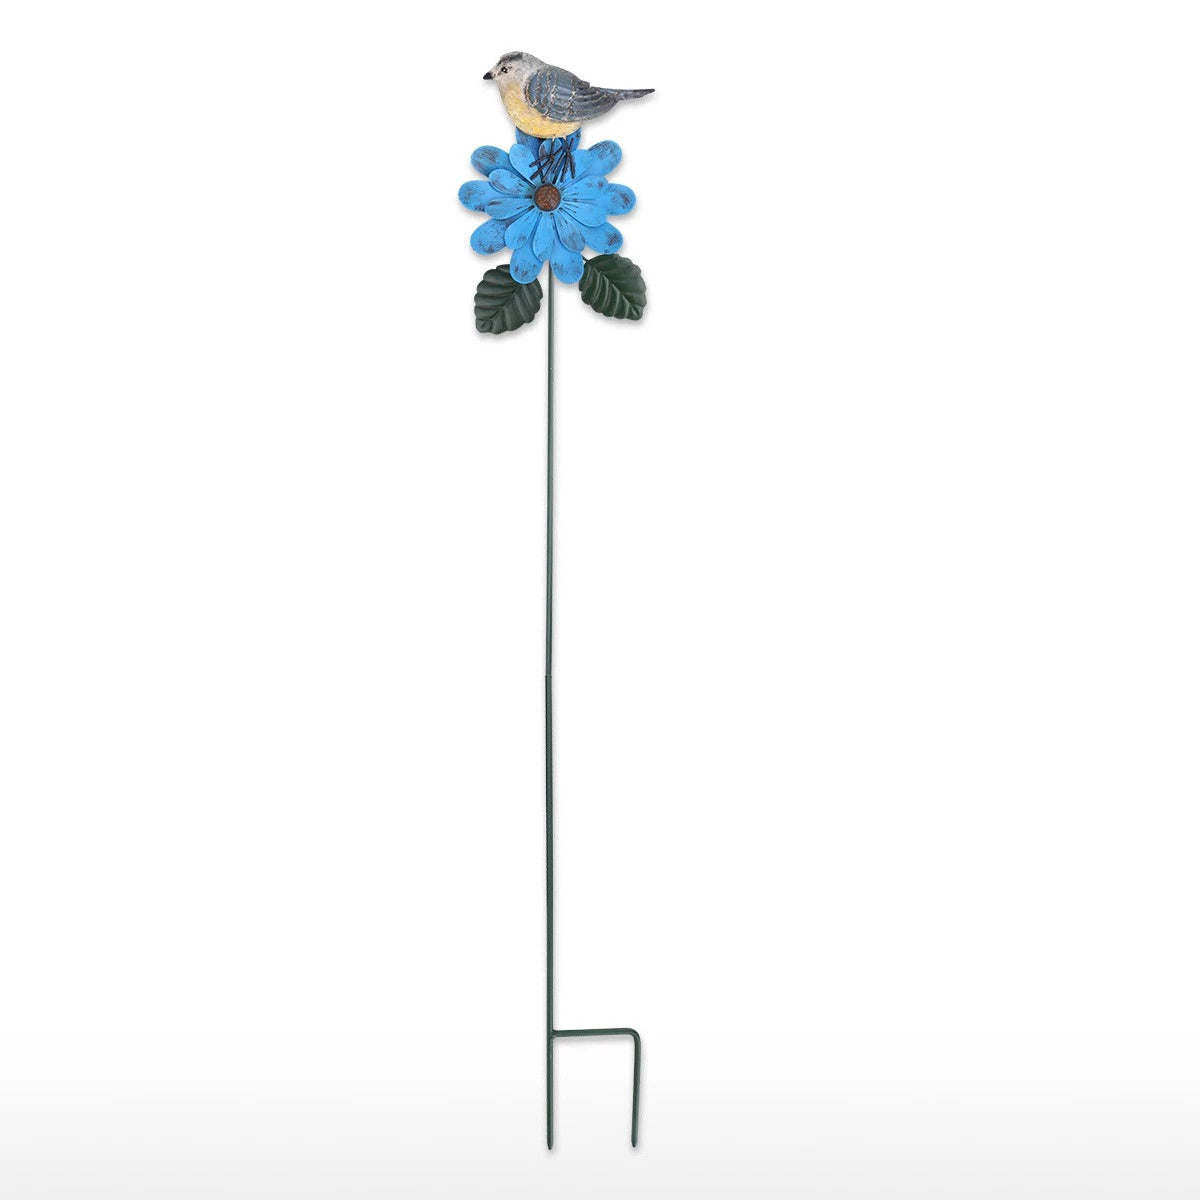 Metal Flower Stakes and Garden Stakes on the Blue Flower with Goldfinch Bird for Garden Ornaments